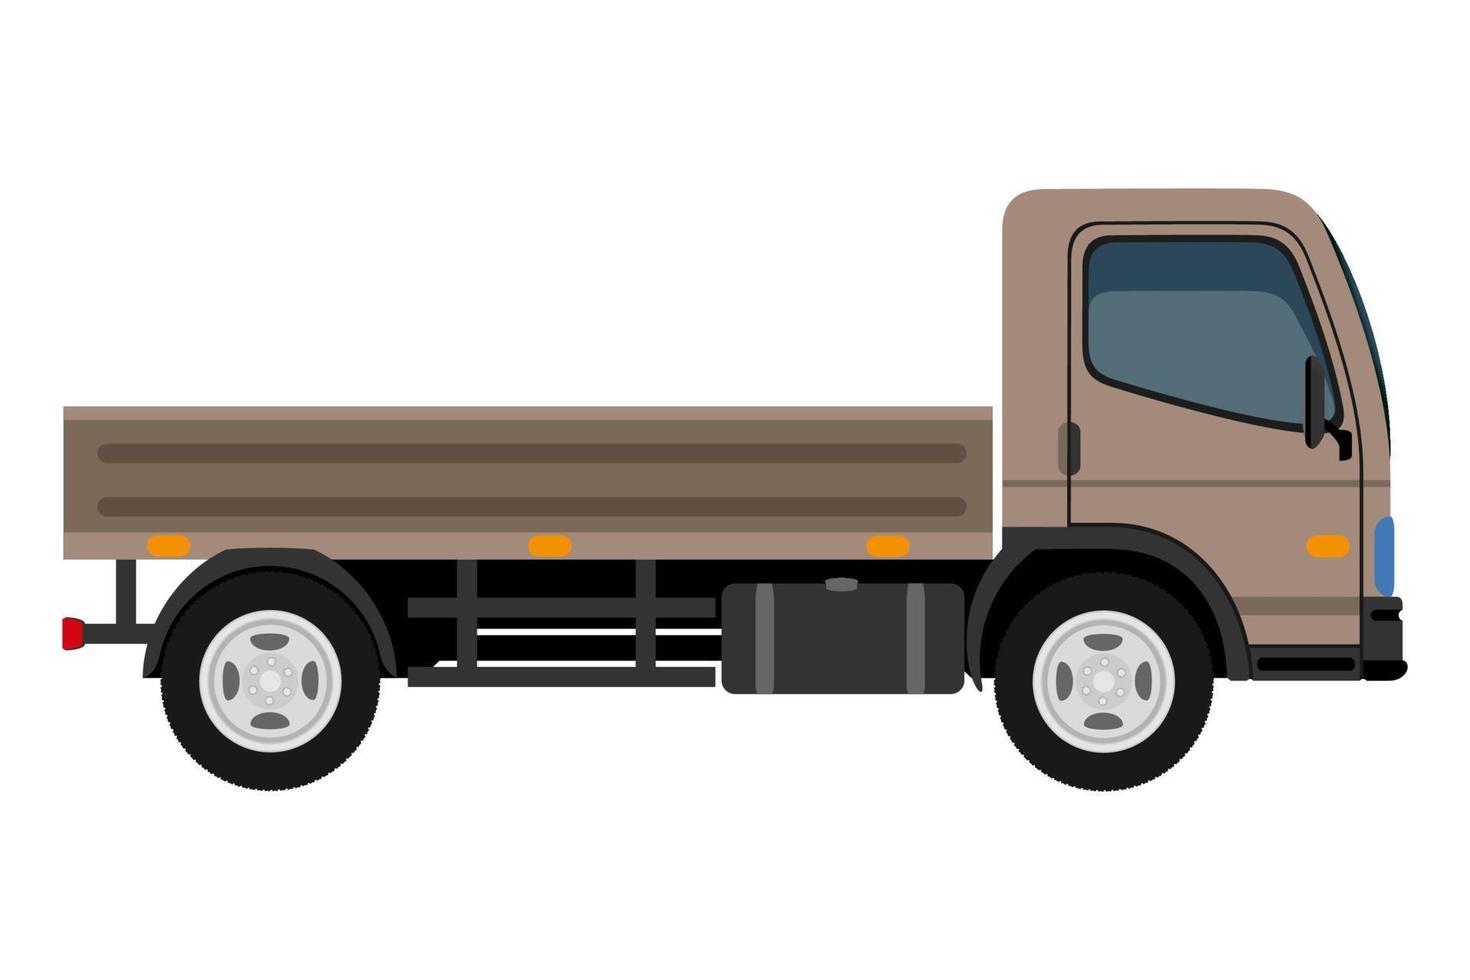 transport for the transportation of goods or passengers flat icon vector illustration isolated on white background